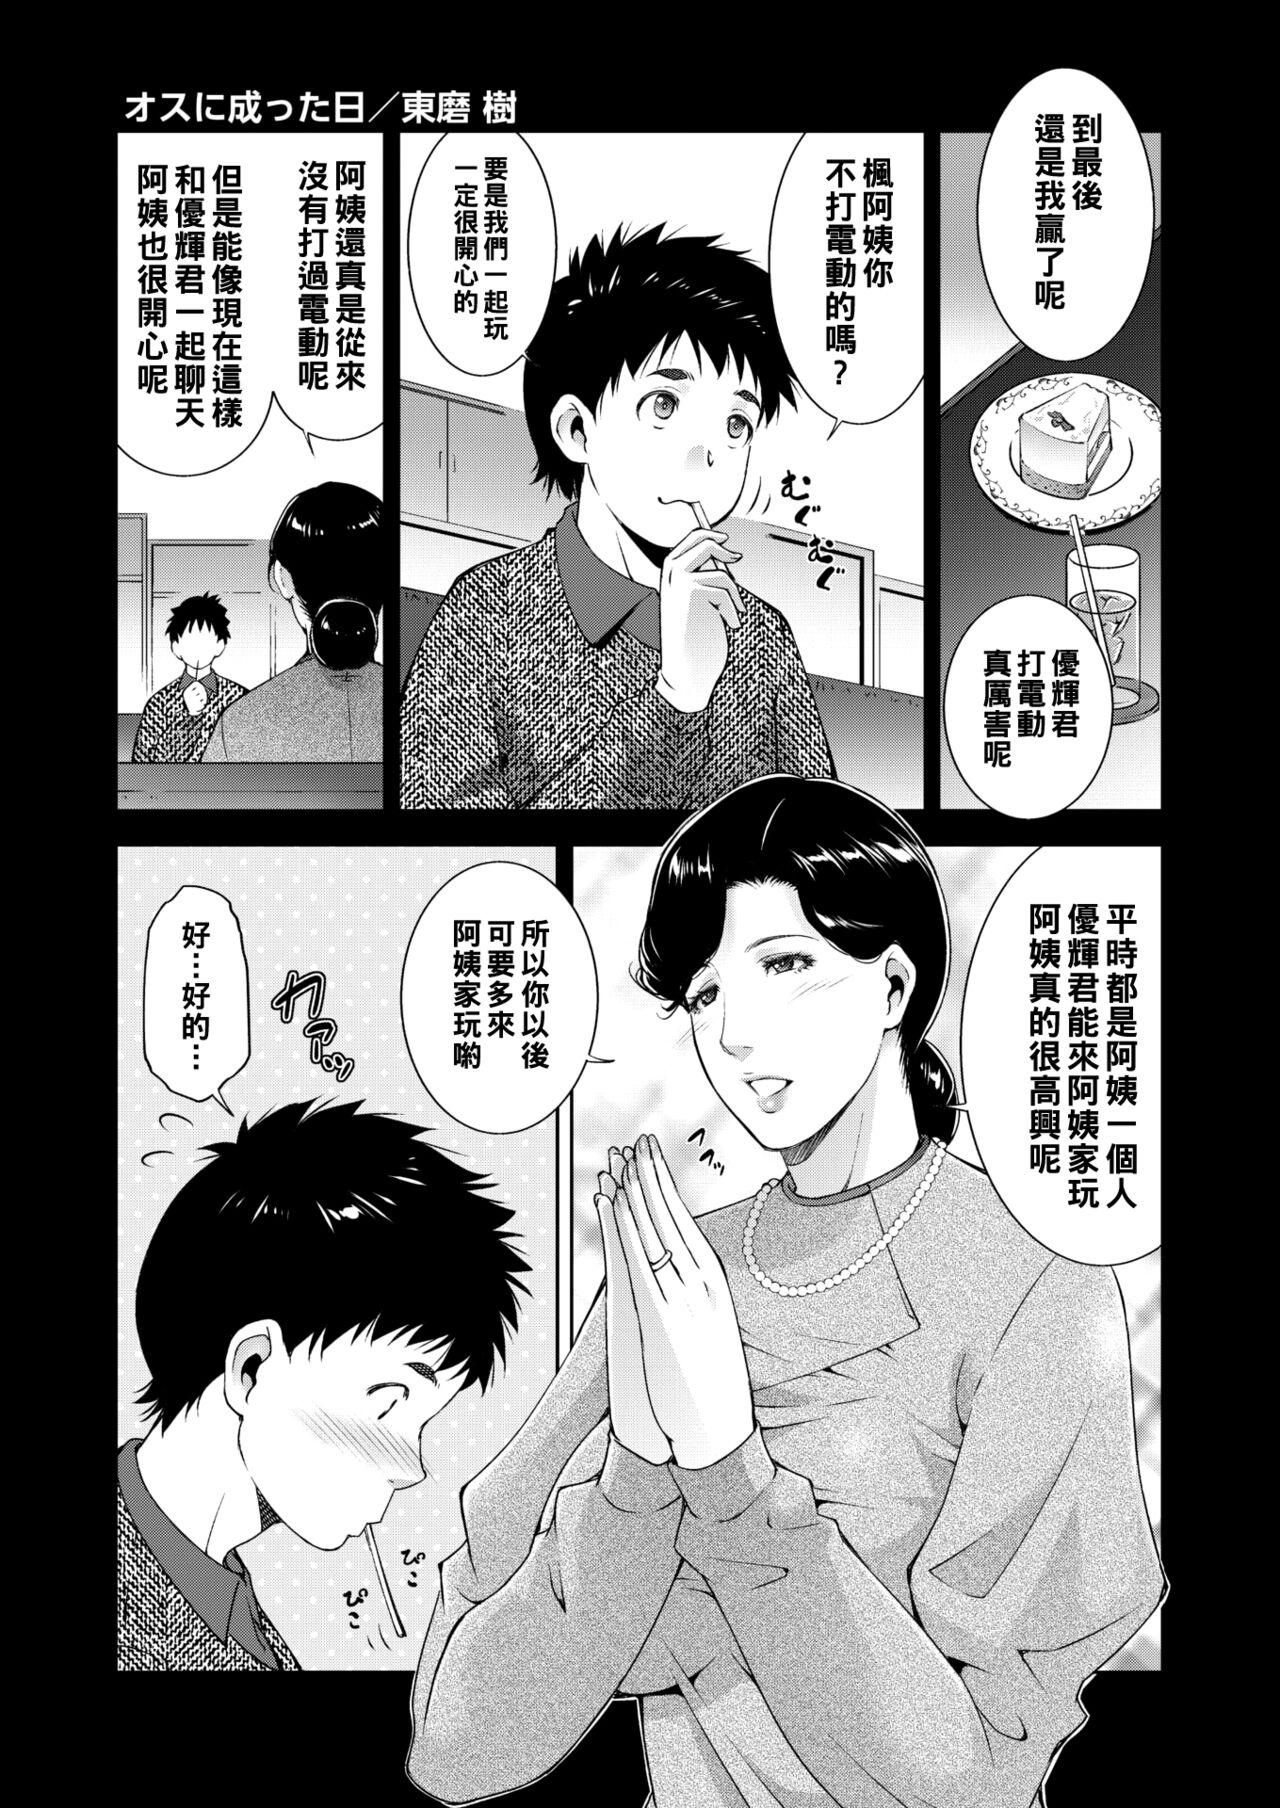 Foursome オスに成った日（Chinese） Roughsex - Page 1